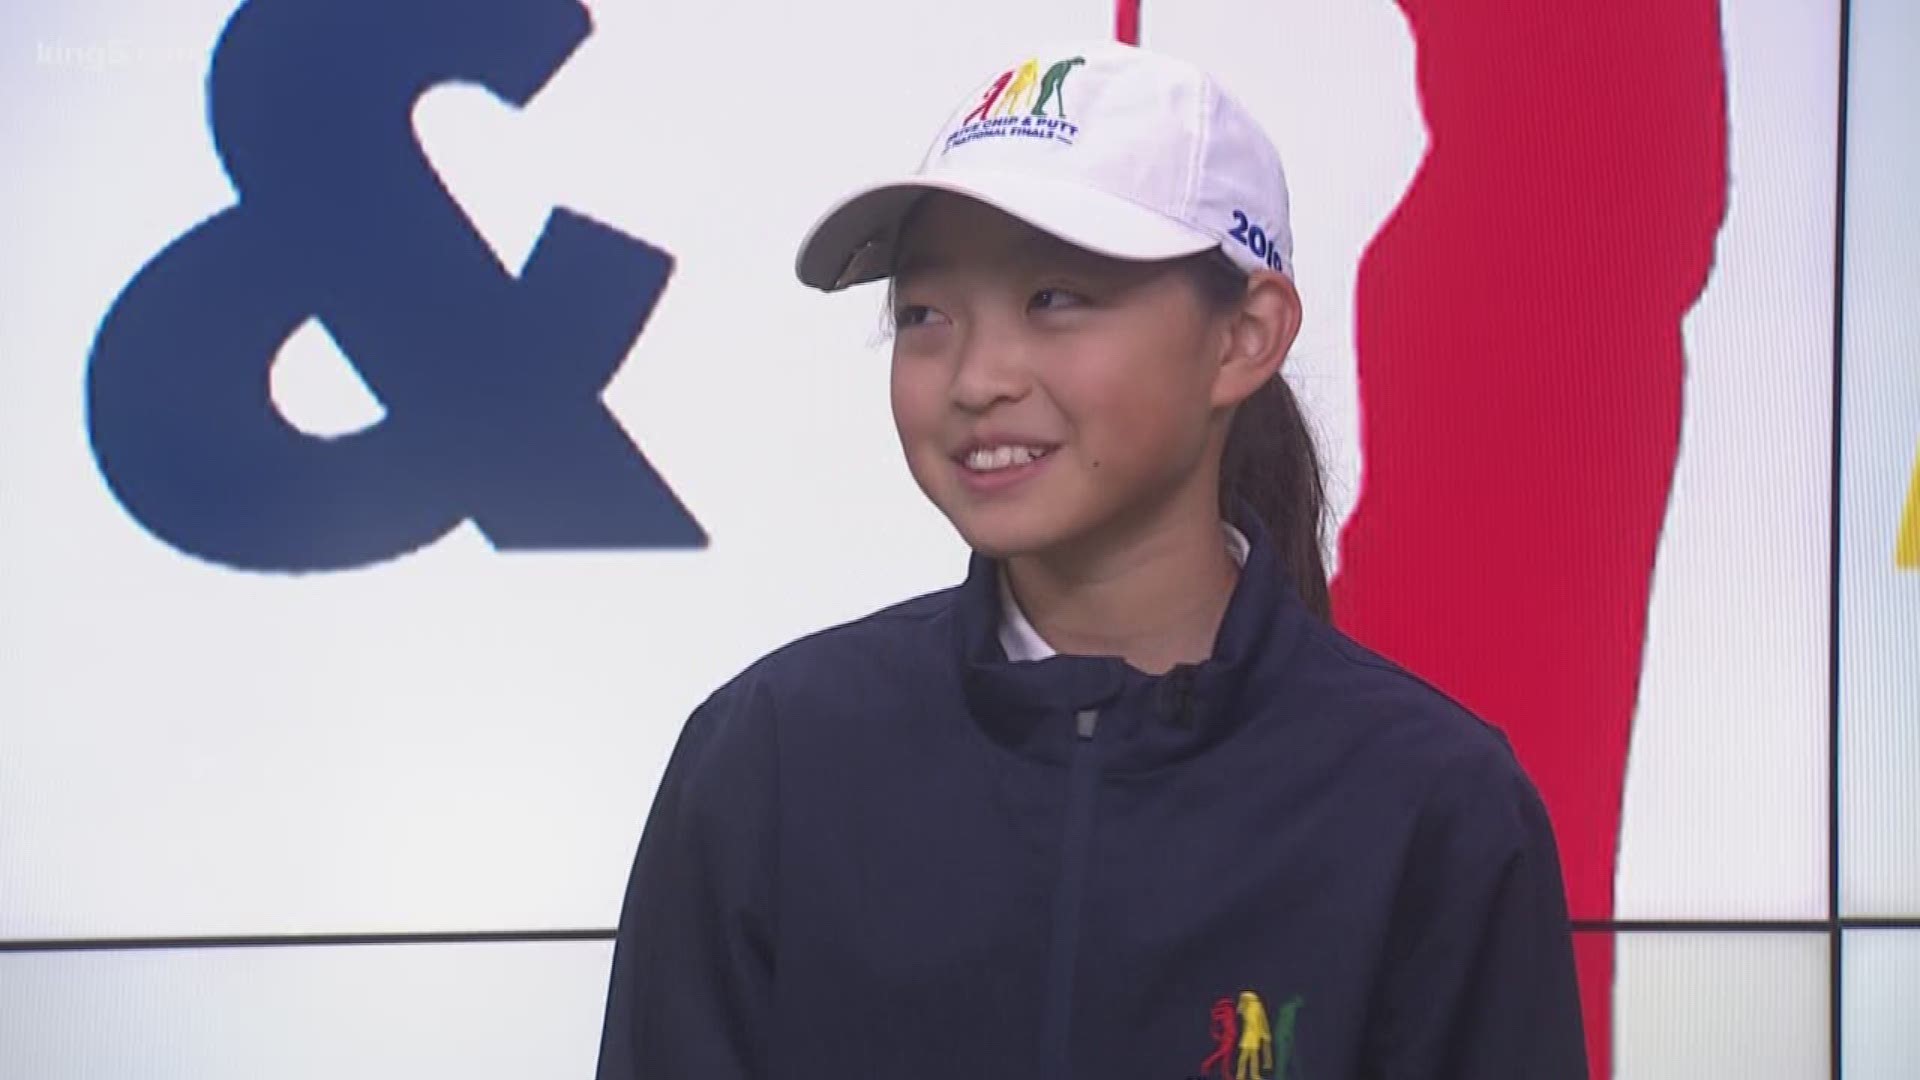 She's not even 10 years old yet and already she's a champion at Augusta. Bellevue's Angela Zhang dominated her age group at the Drive, Chip & Putt competition at the Masters. She came to the KING 5 studio to show Jake Whittenberg and Mimi Jung her talent.